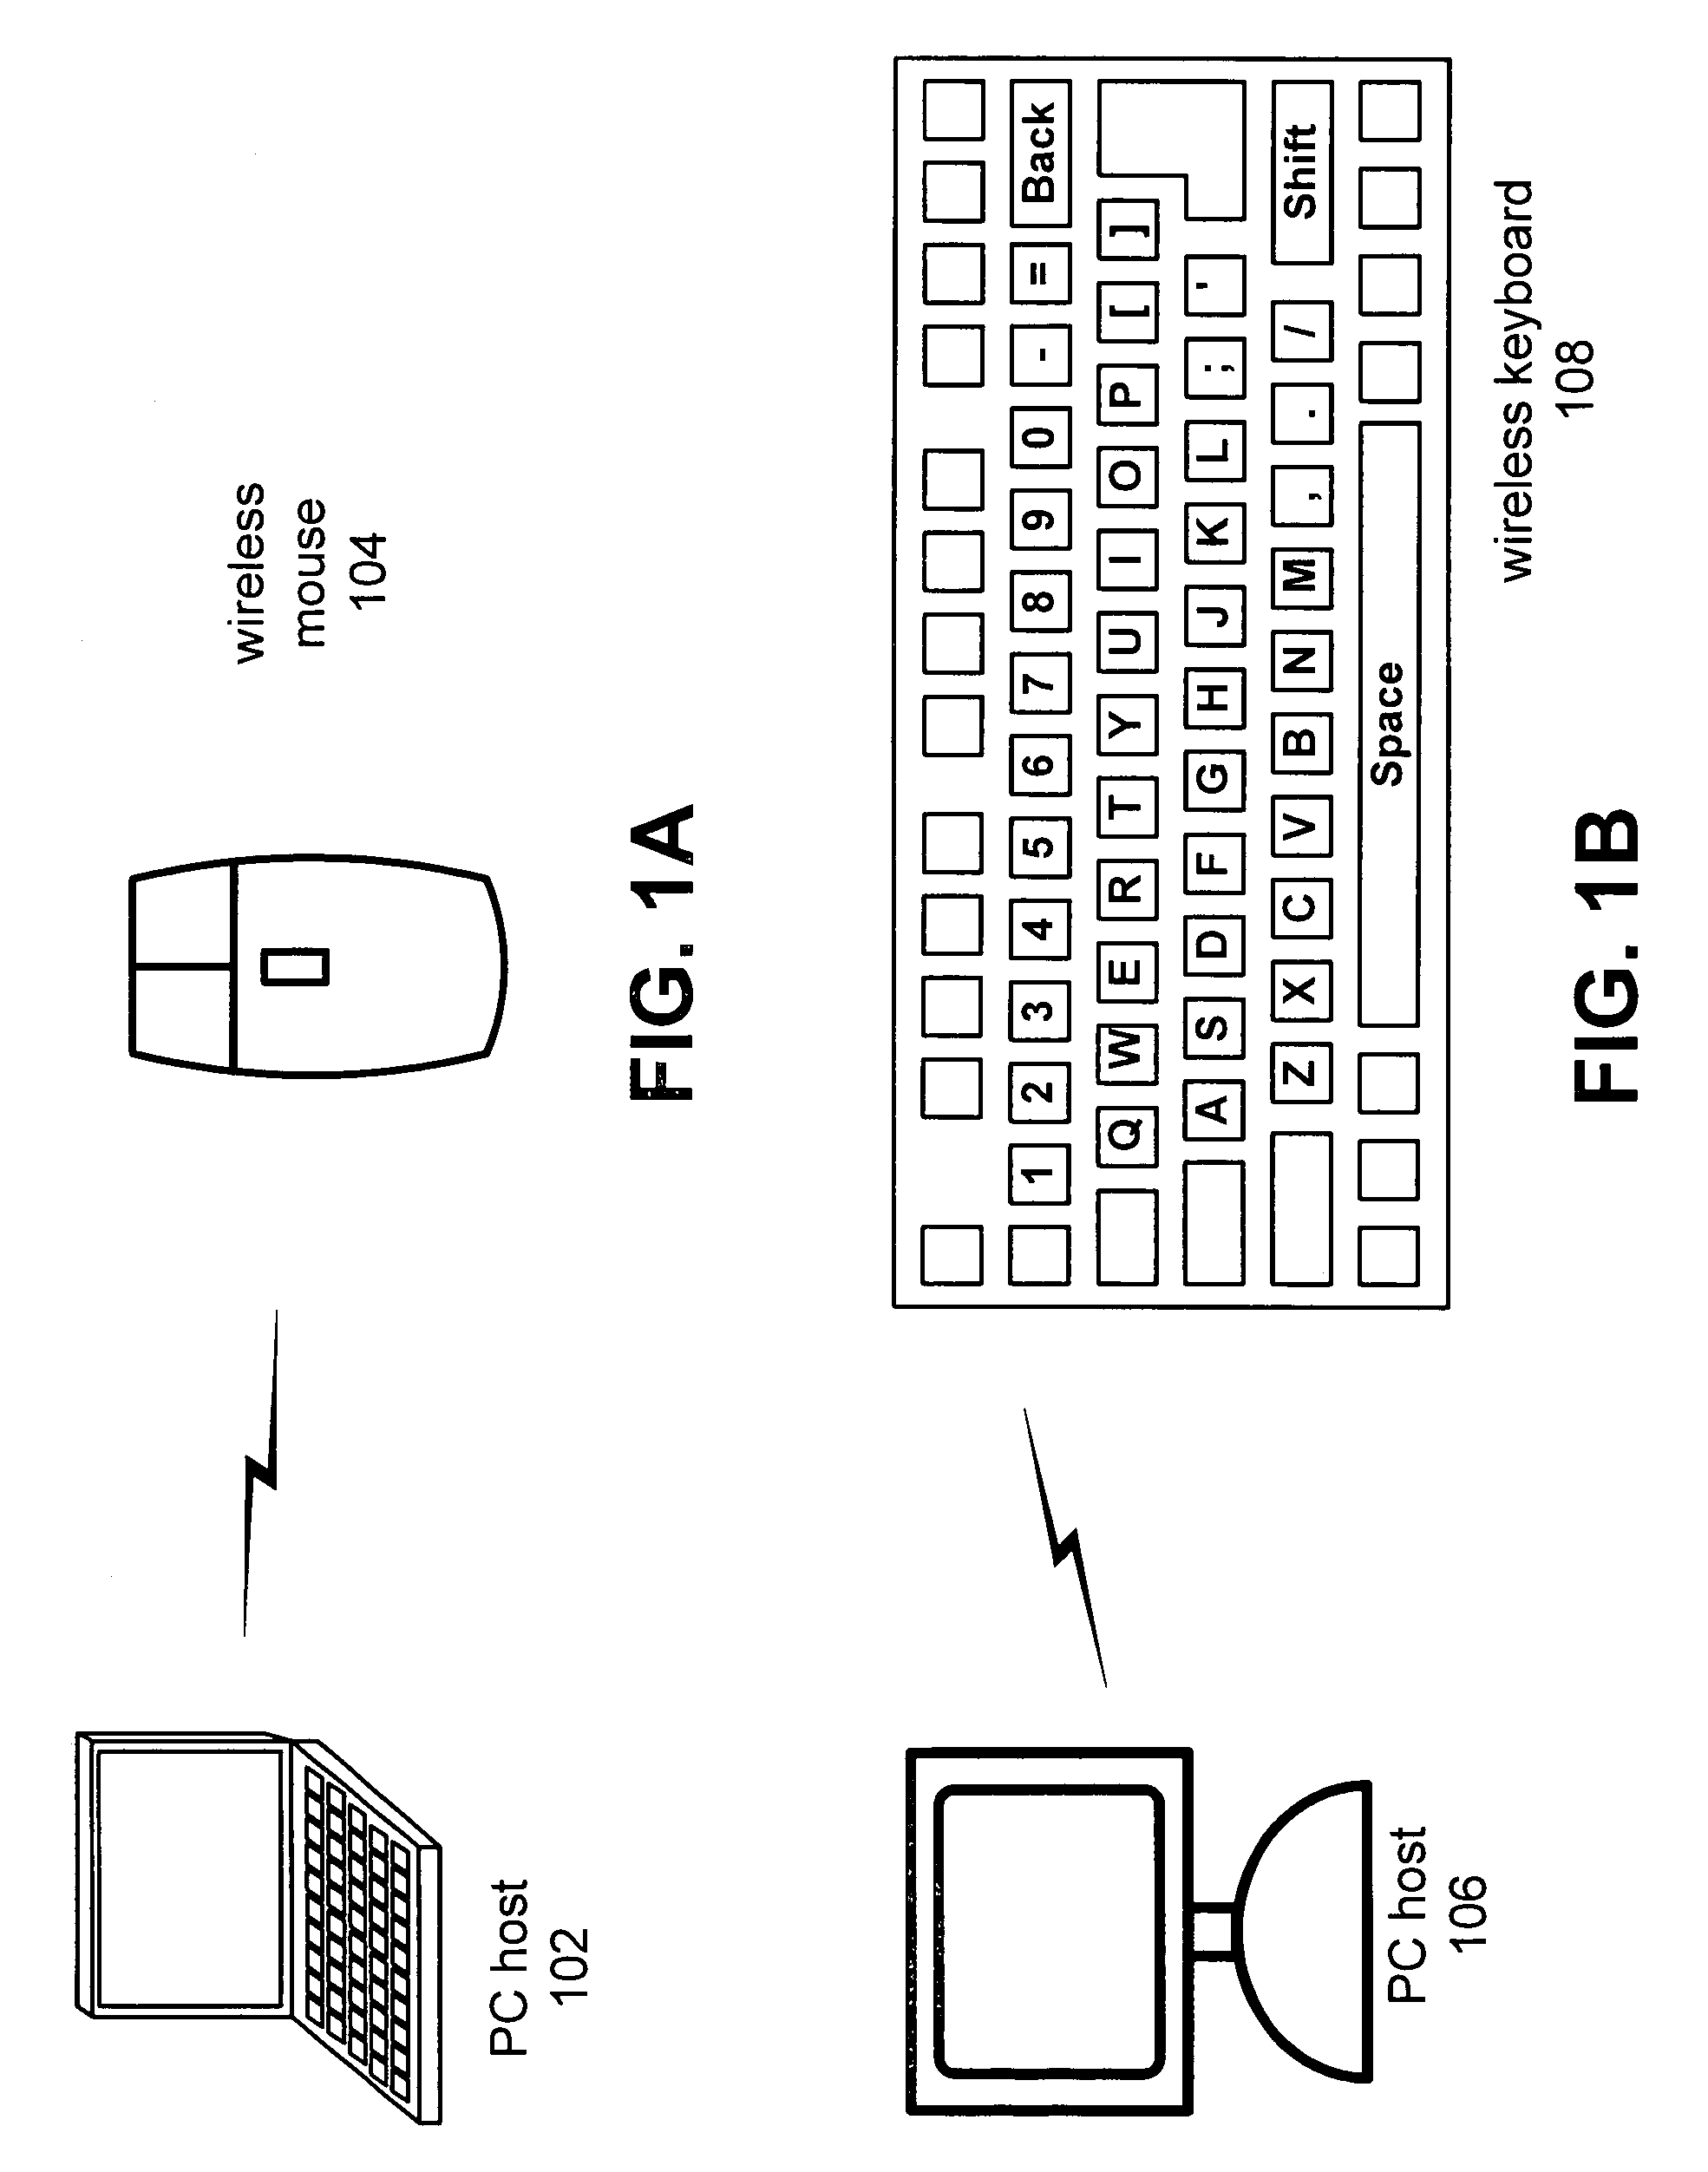 Dual-mode clock for improved power management in a wireless device